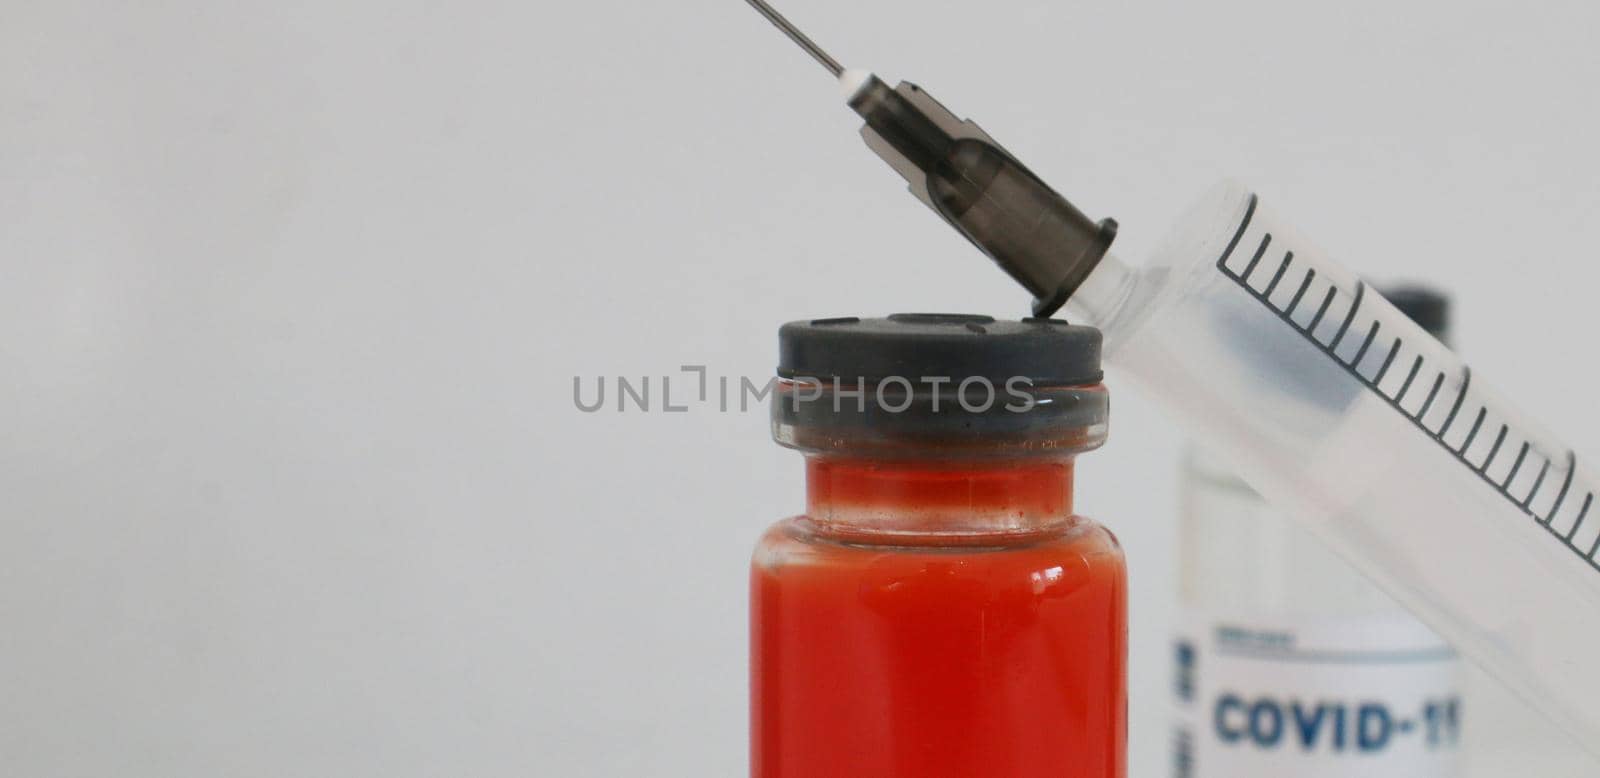 Syringe and two bottles for covid-19 vaccine on a white background. by gelog67